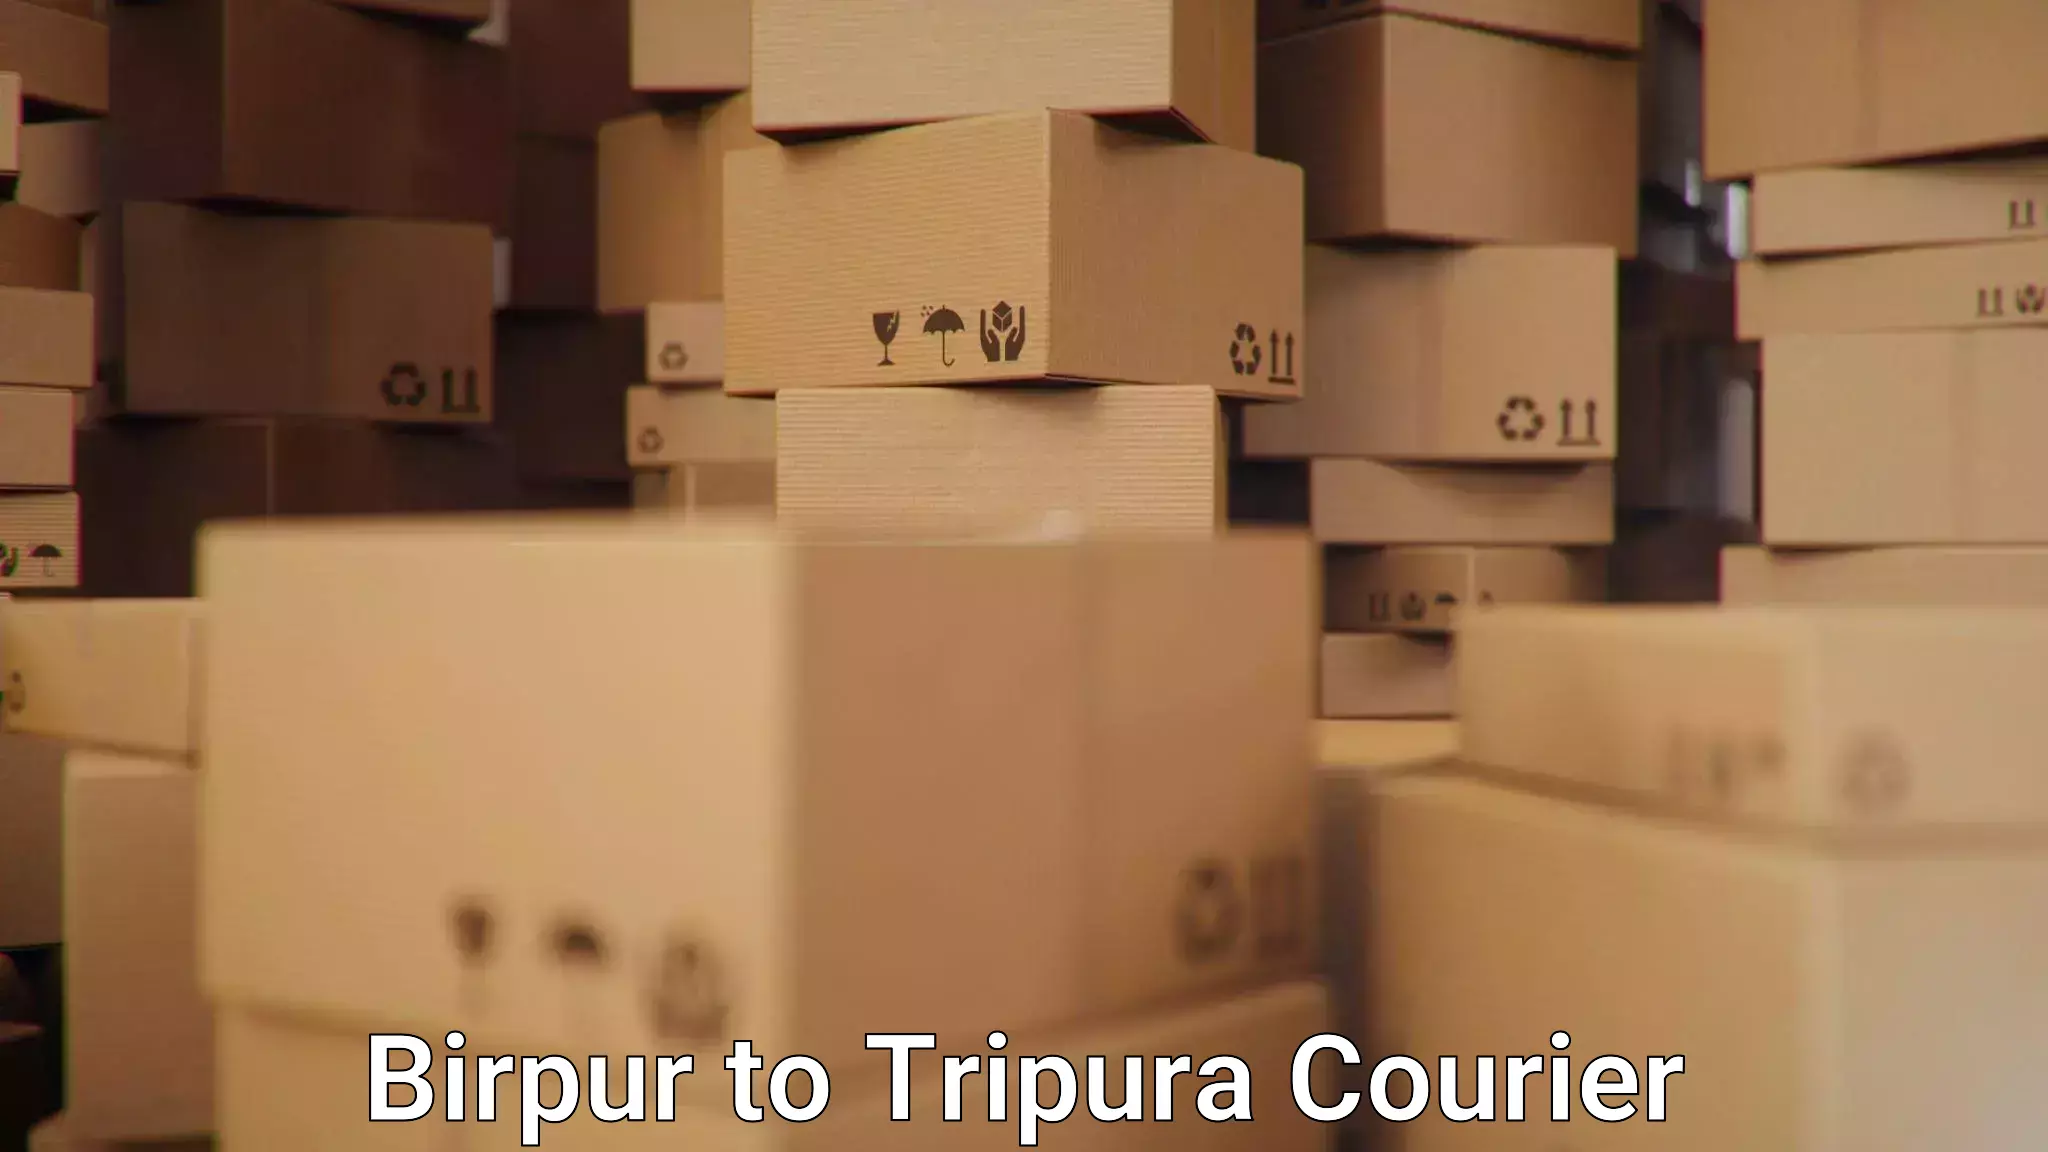 On-call courier service in Birpur to Tripura